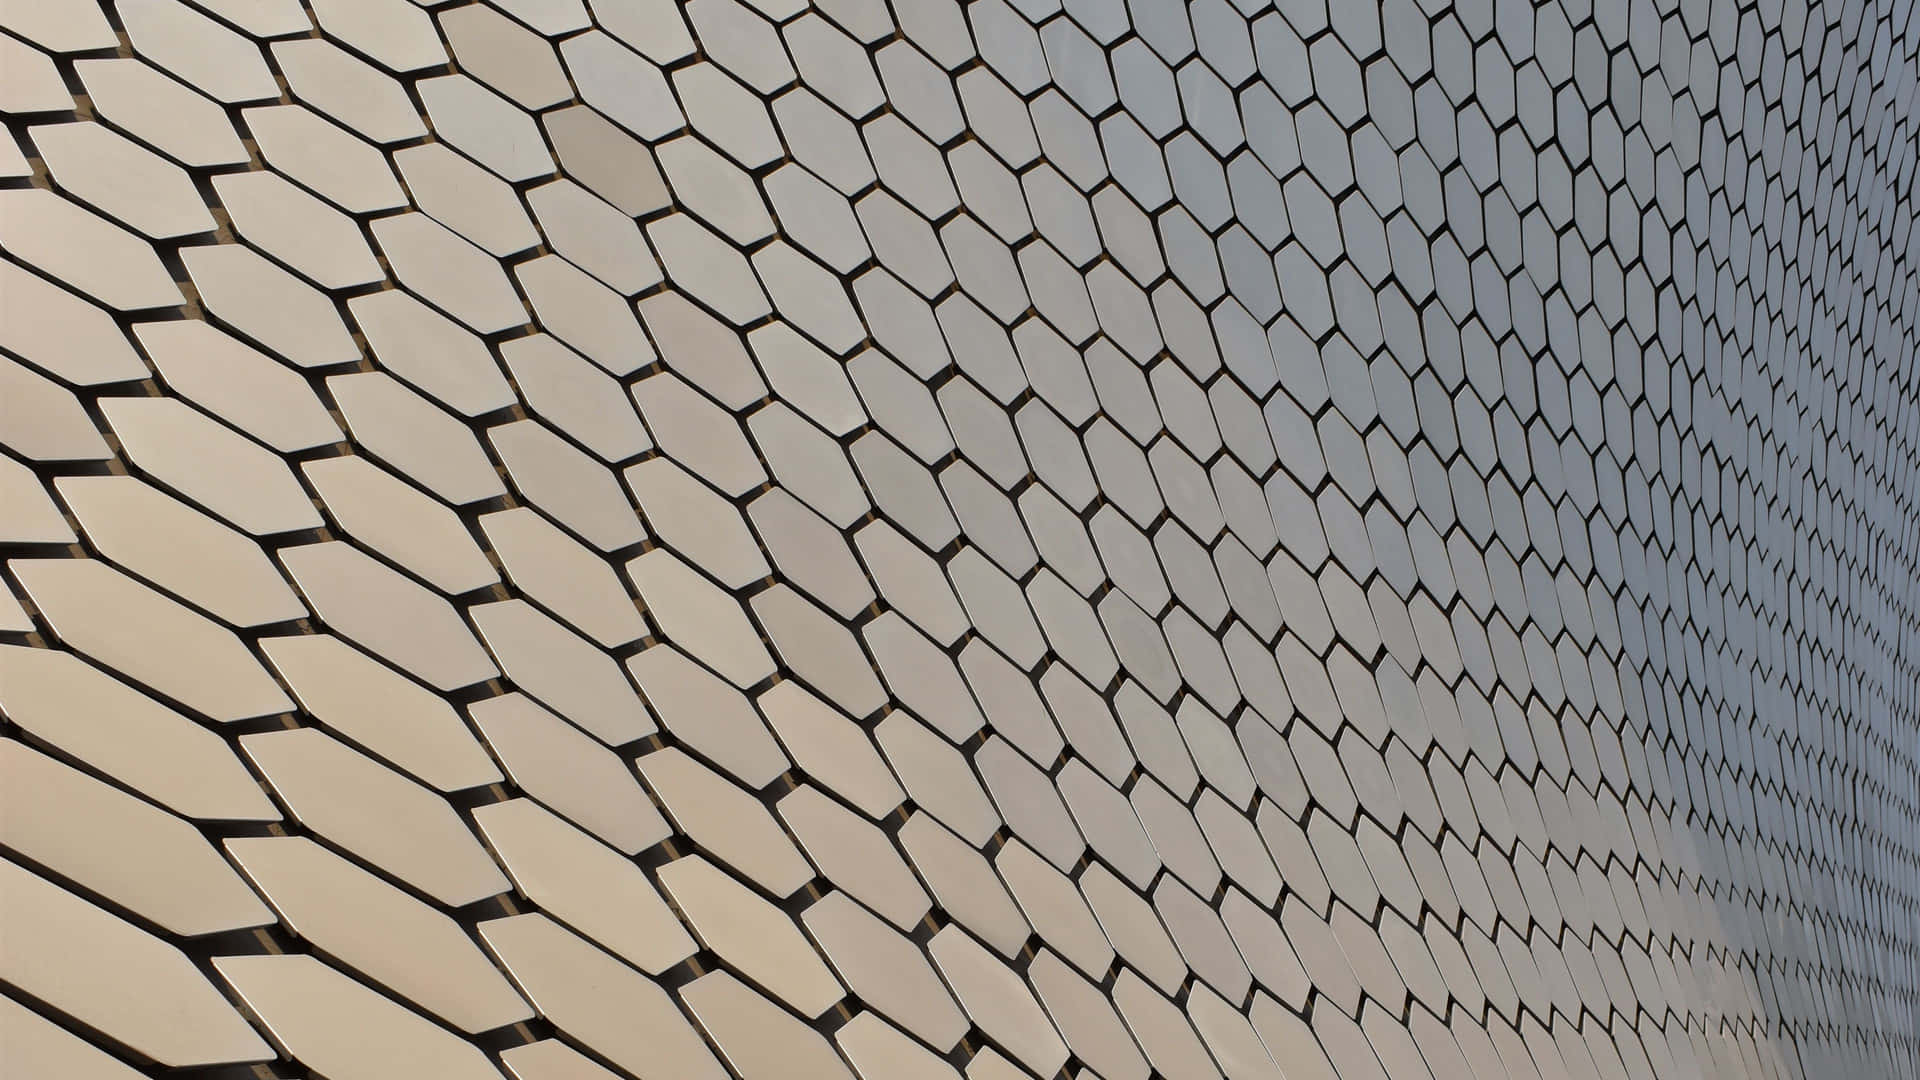 Captivating Hexagons For an Eye-Catching Visual Wallpaper